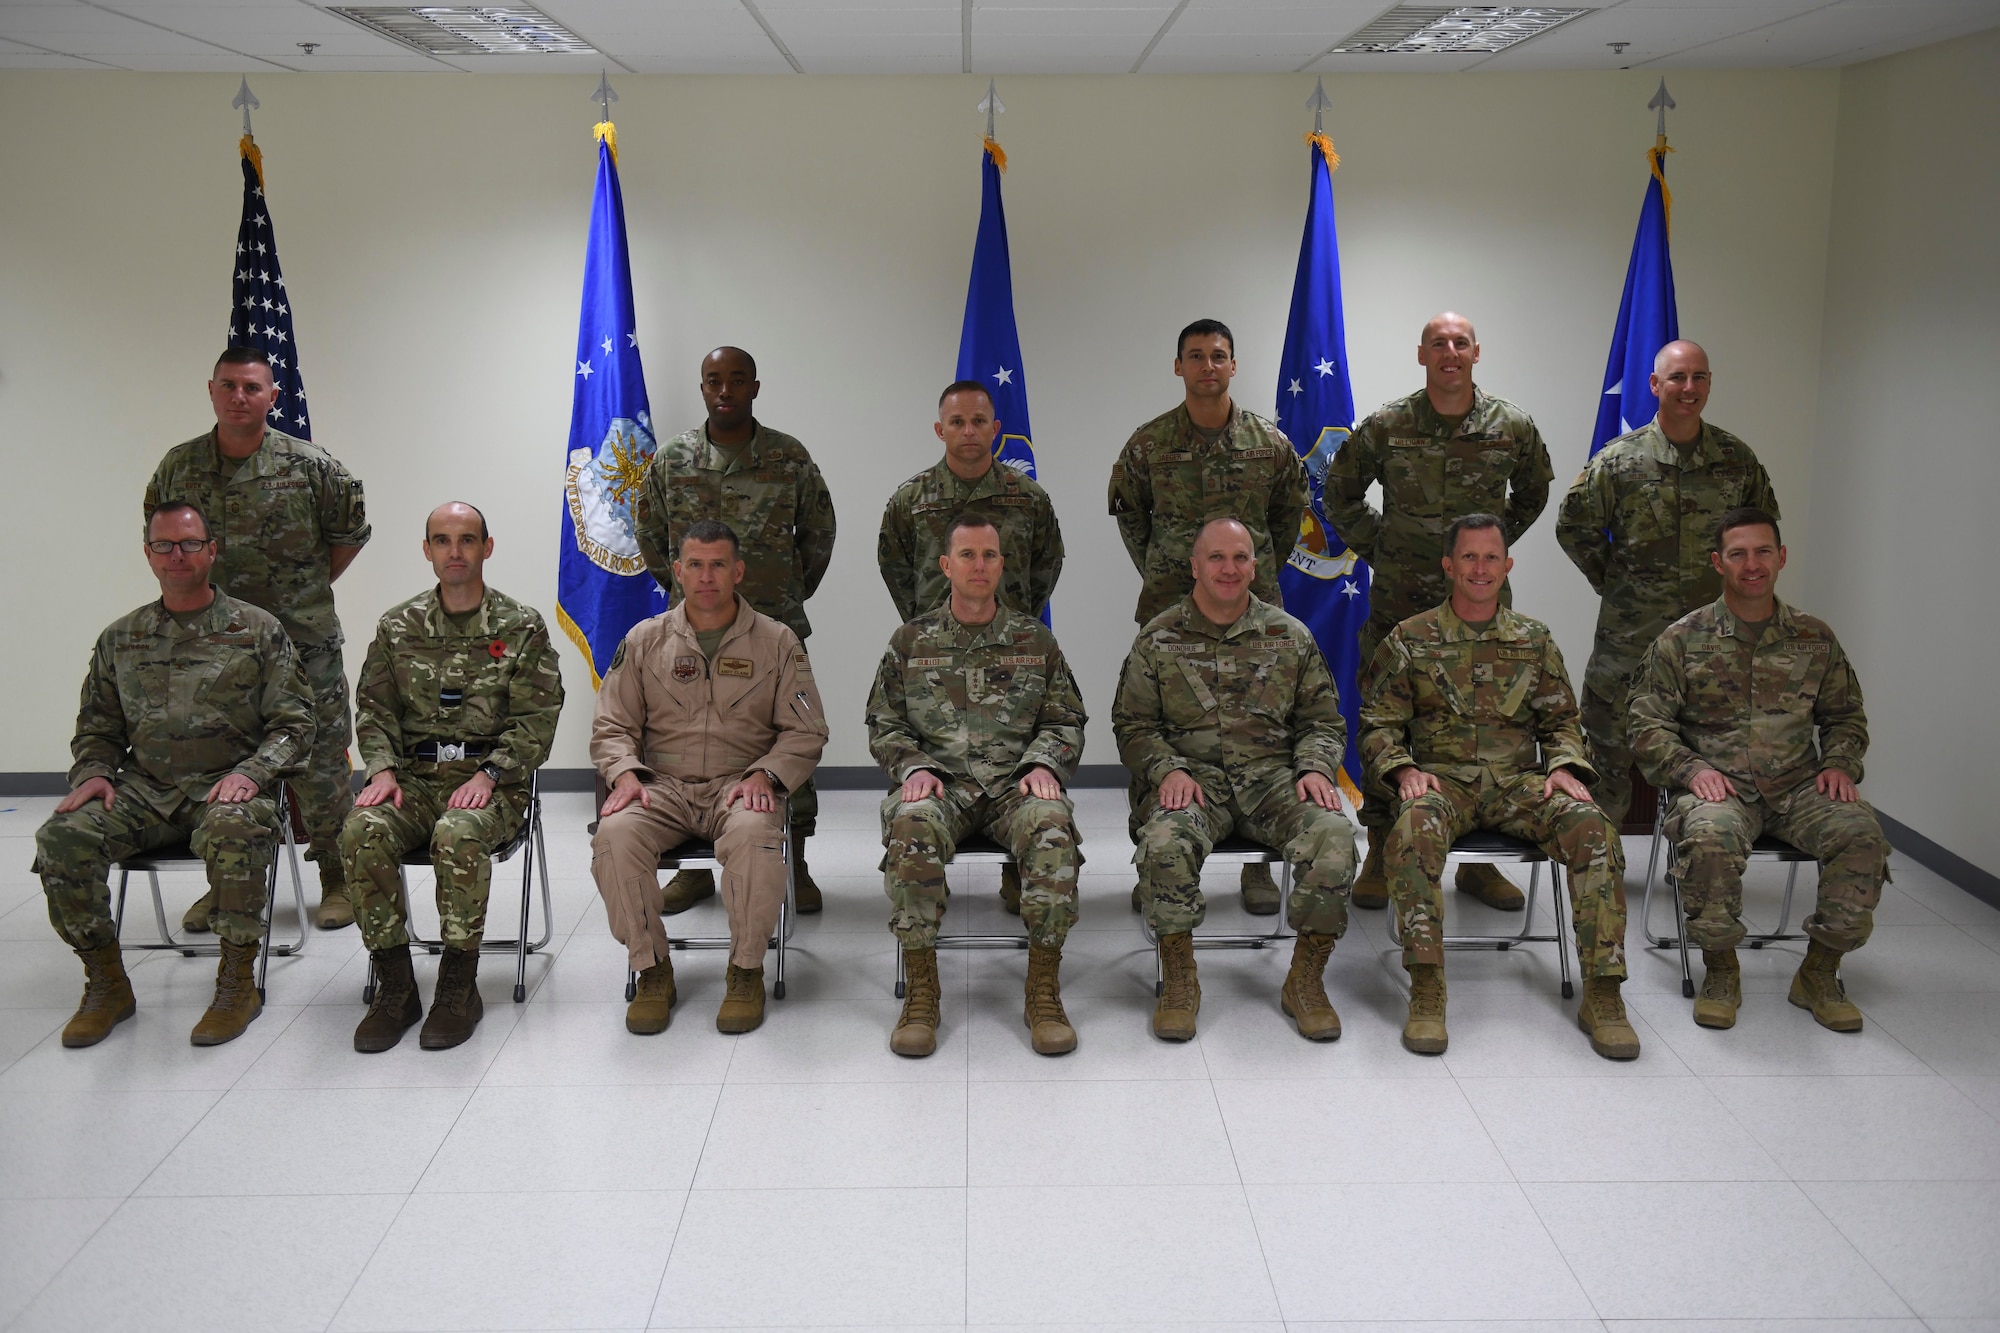 Senior Leaders across AFCENT pose for a photo during the AFCENT Commander's Conference.